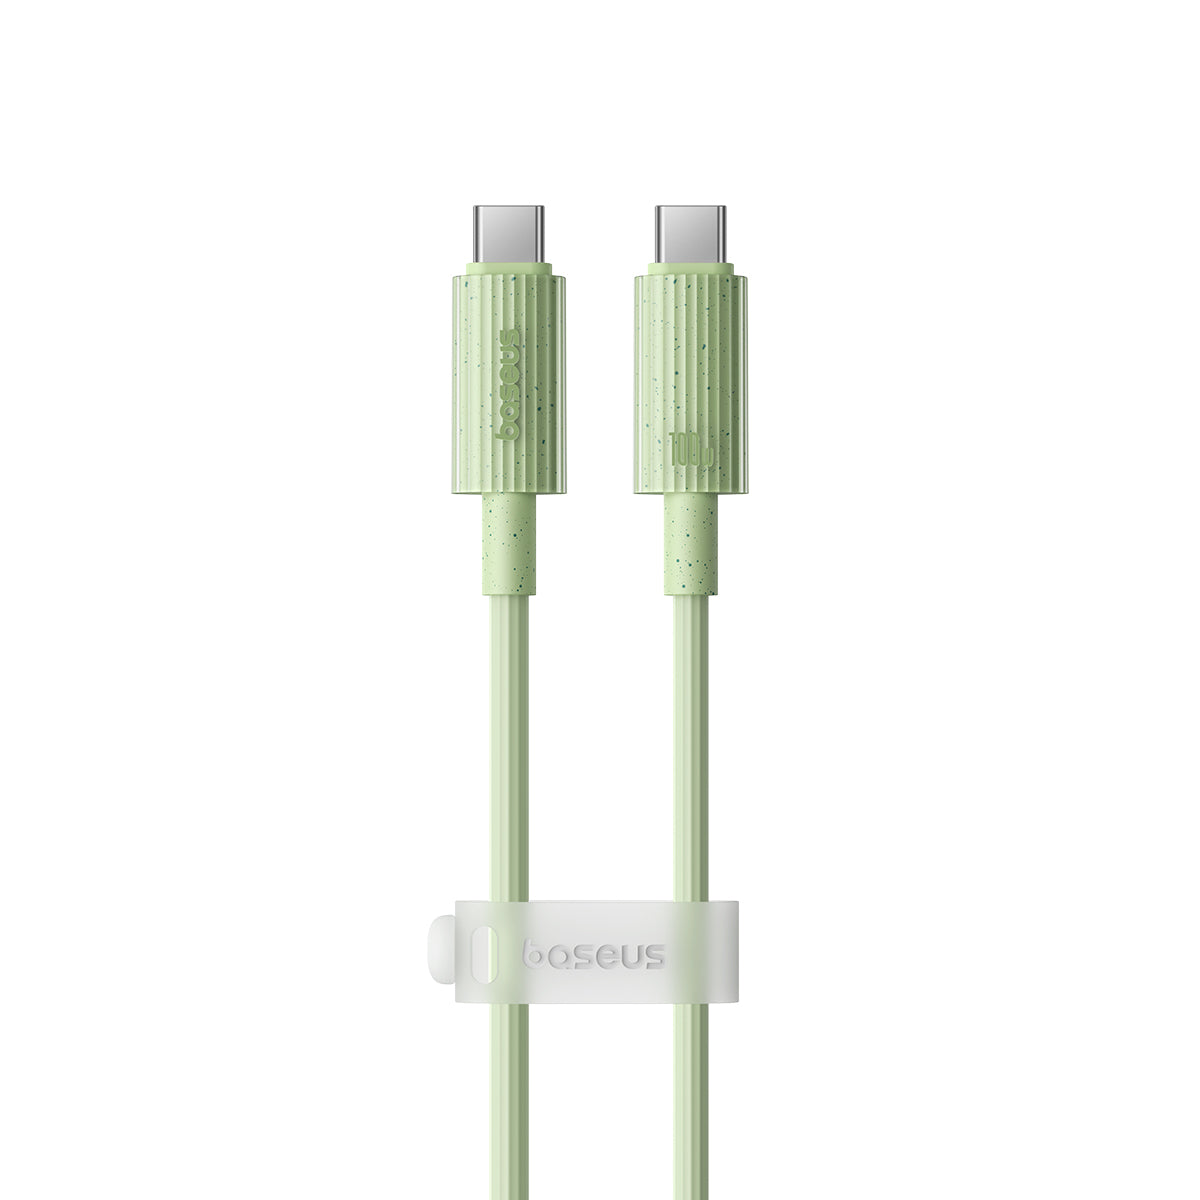 Baseus Cafule USB-C to USB-C Cable 100W 6.6 ft